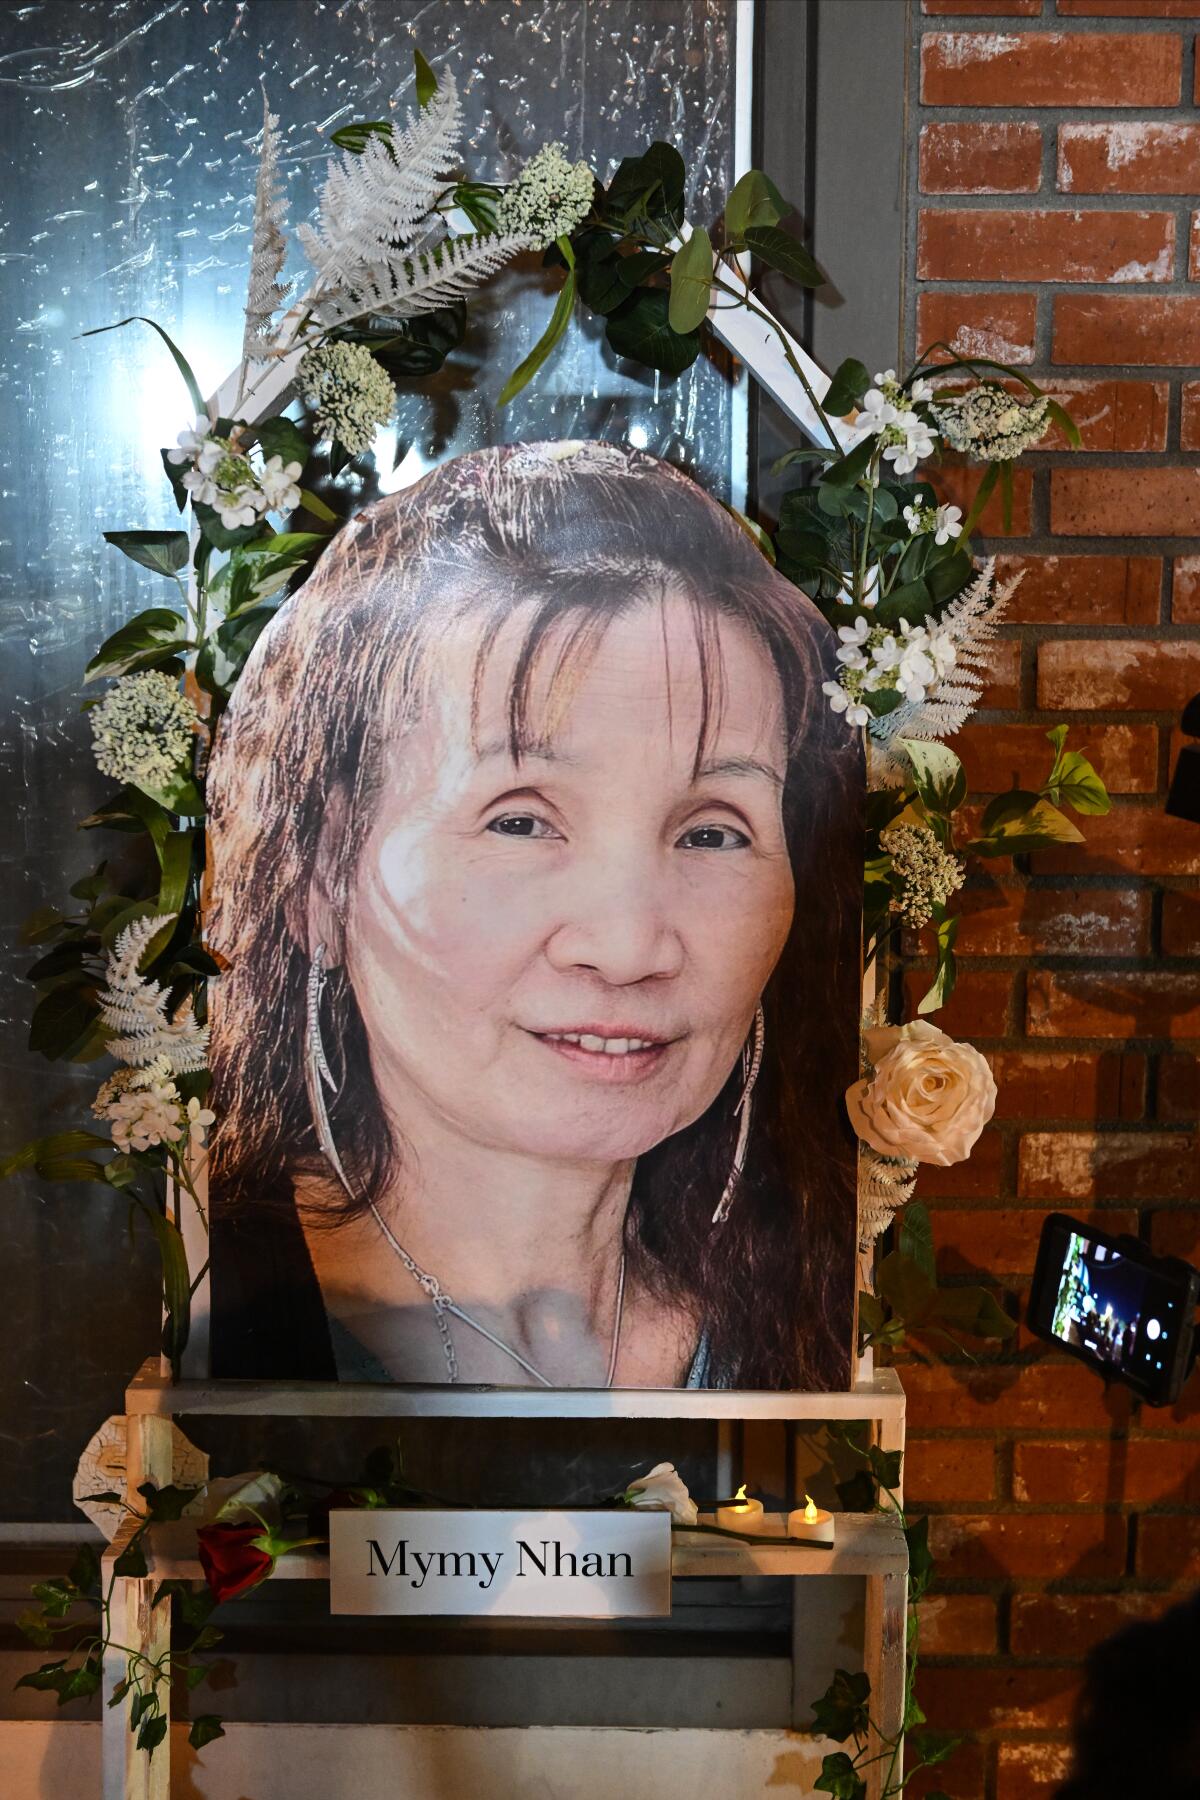 A portrait of Mymy Nhan sits on display in front of the dance studio.